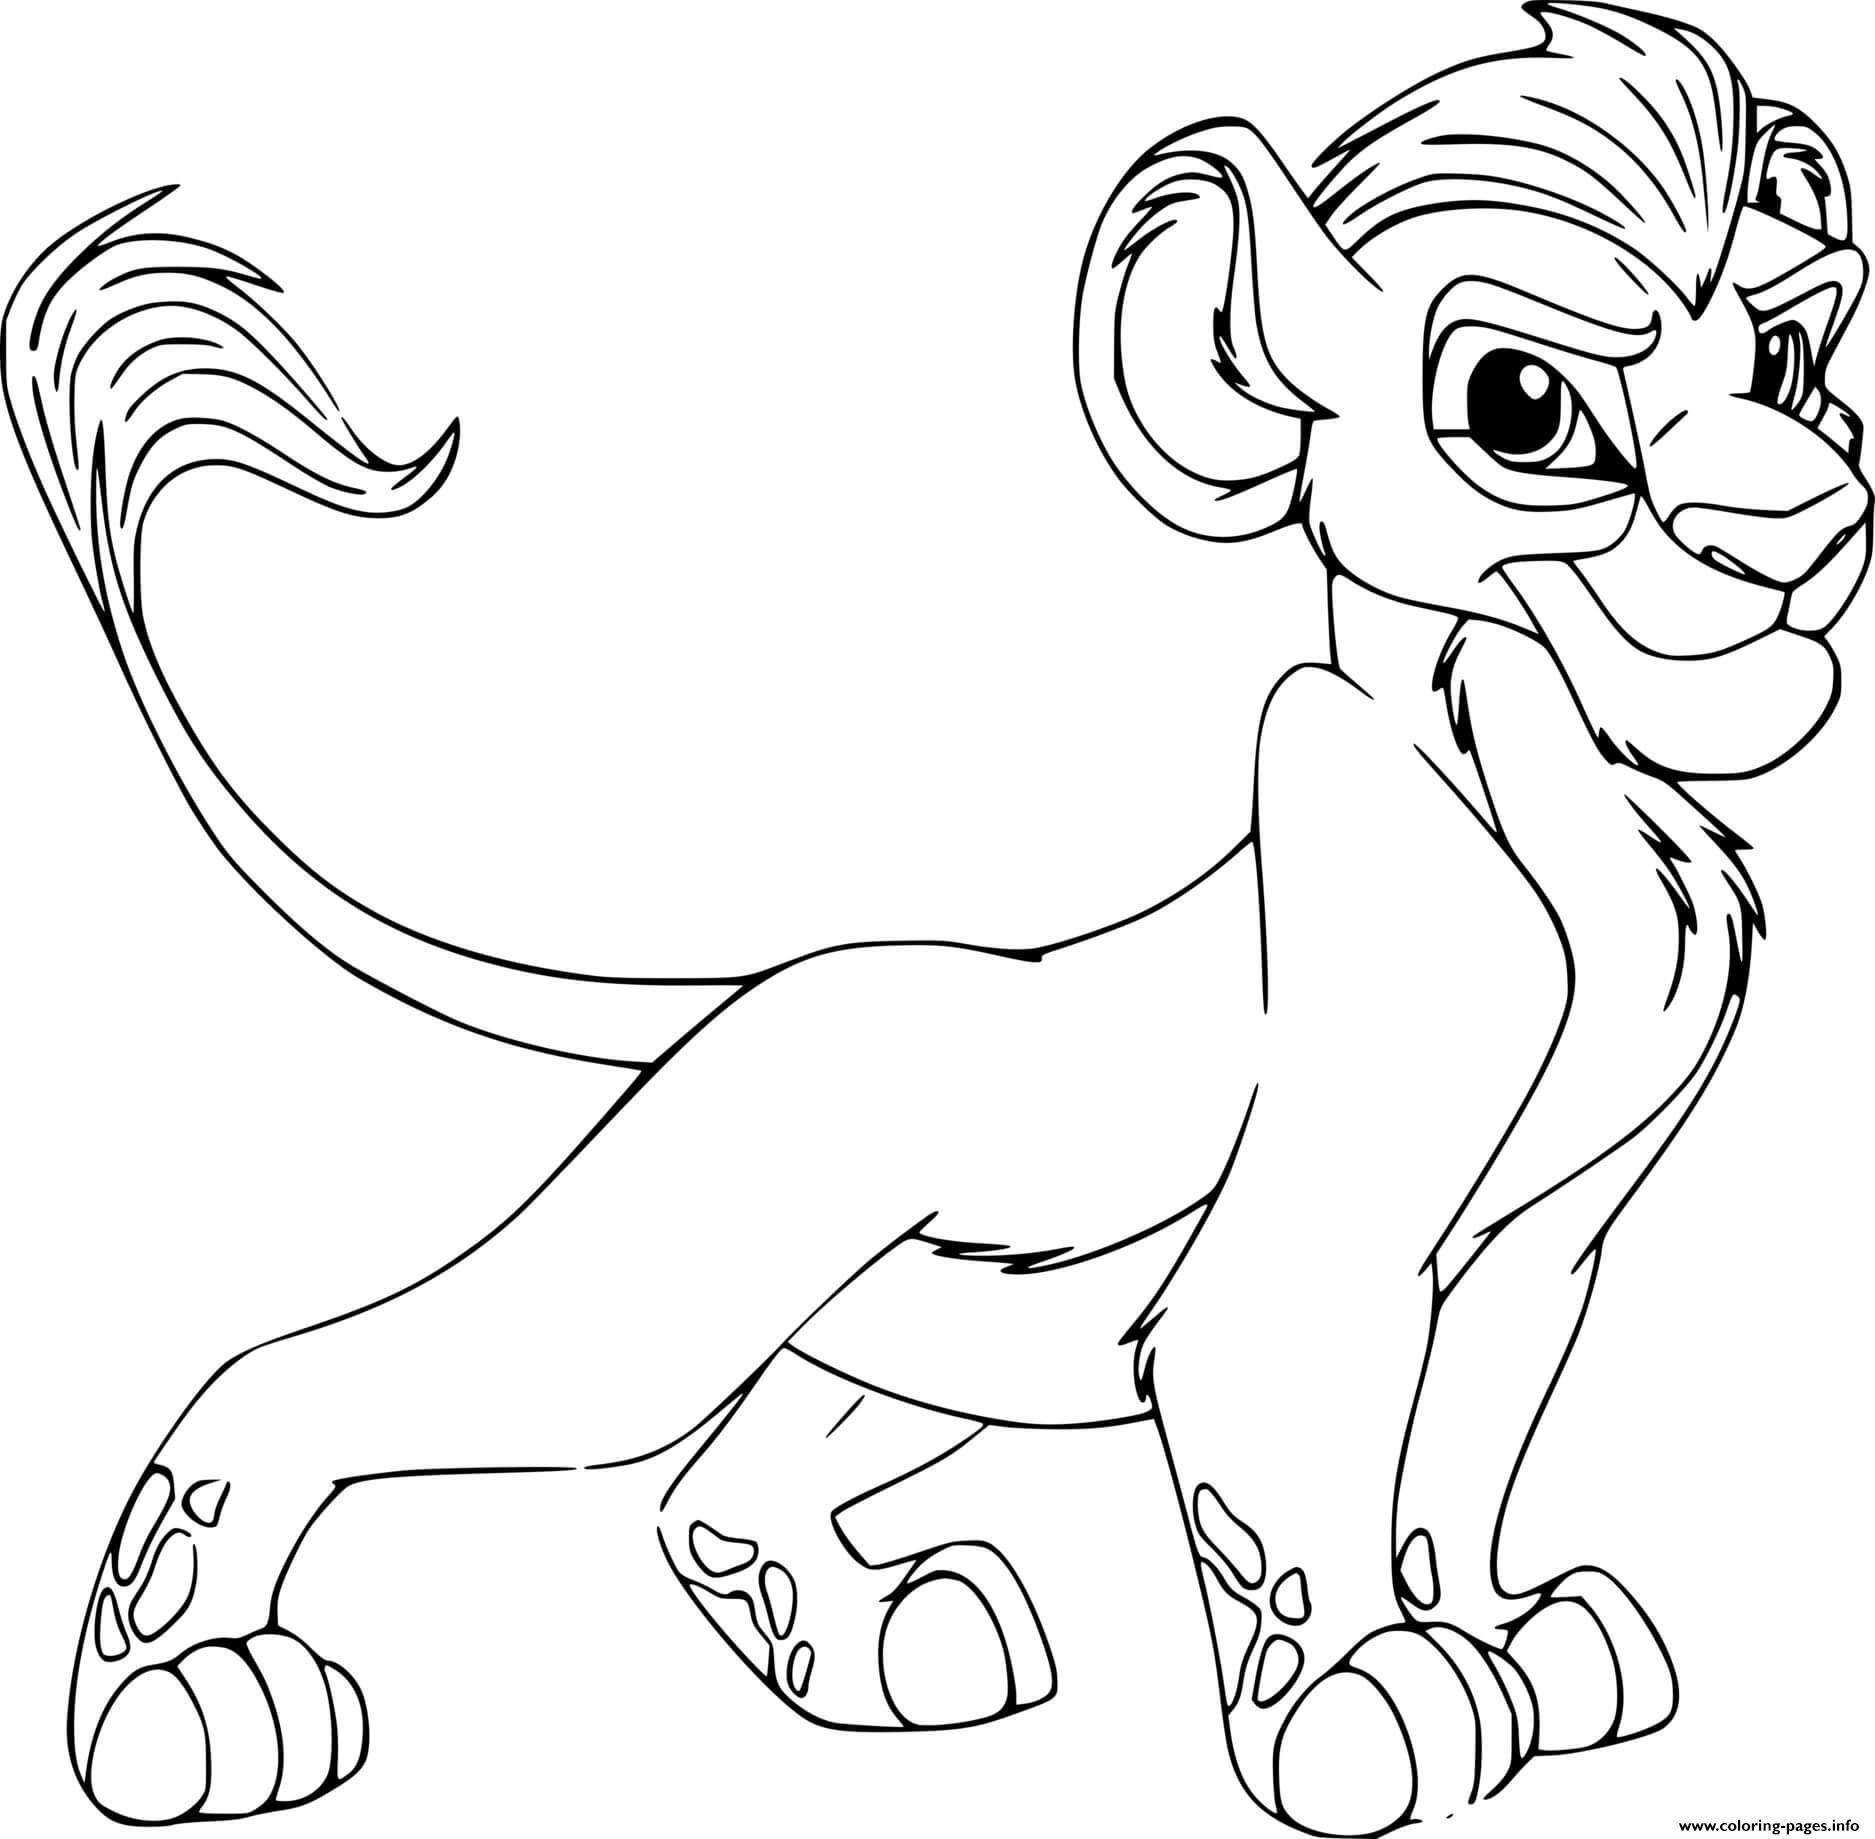 Strong Kion coloring pages